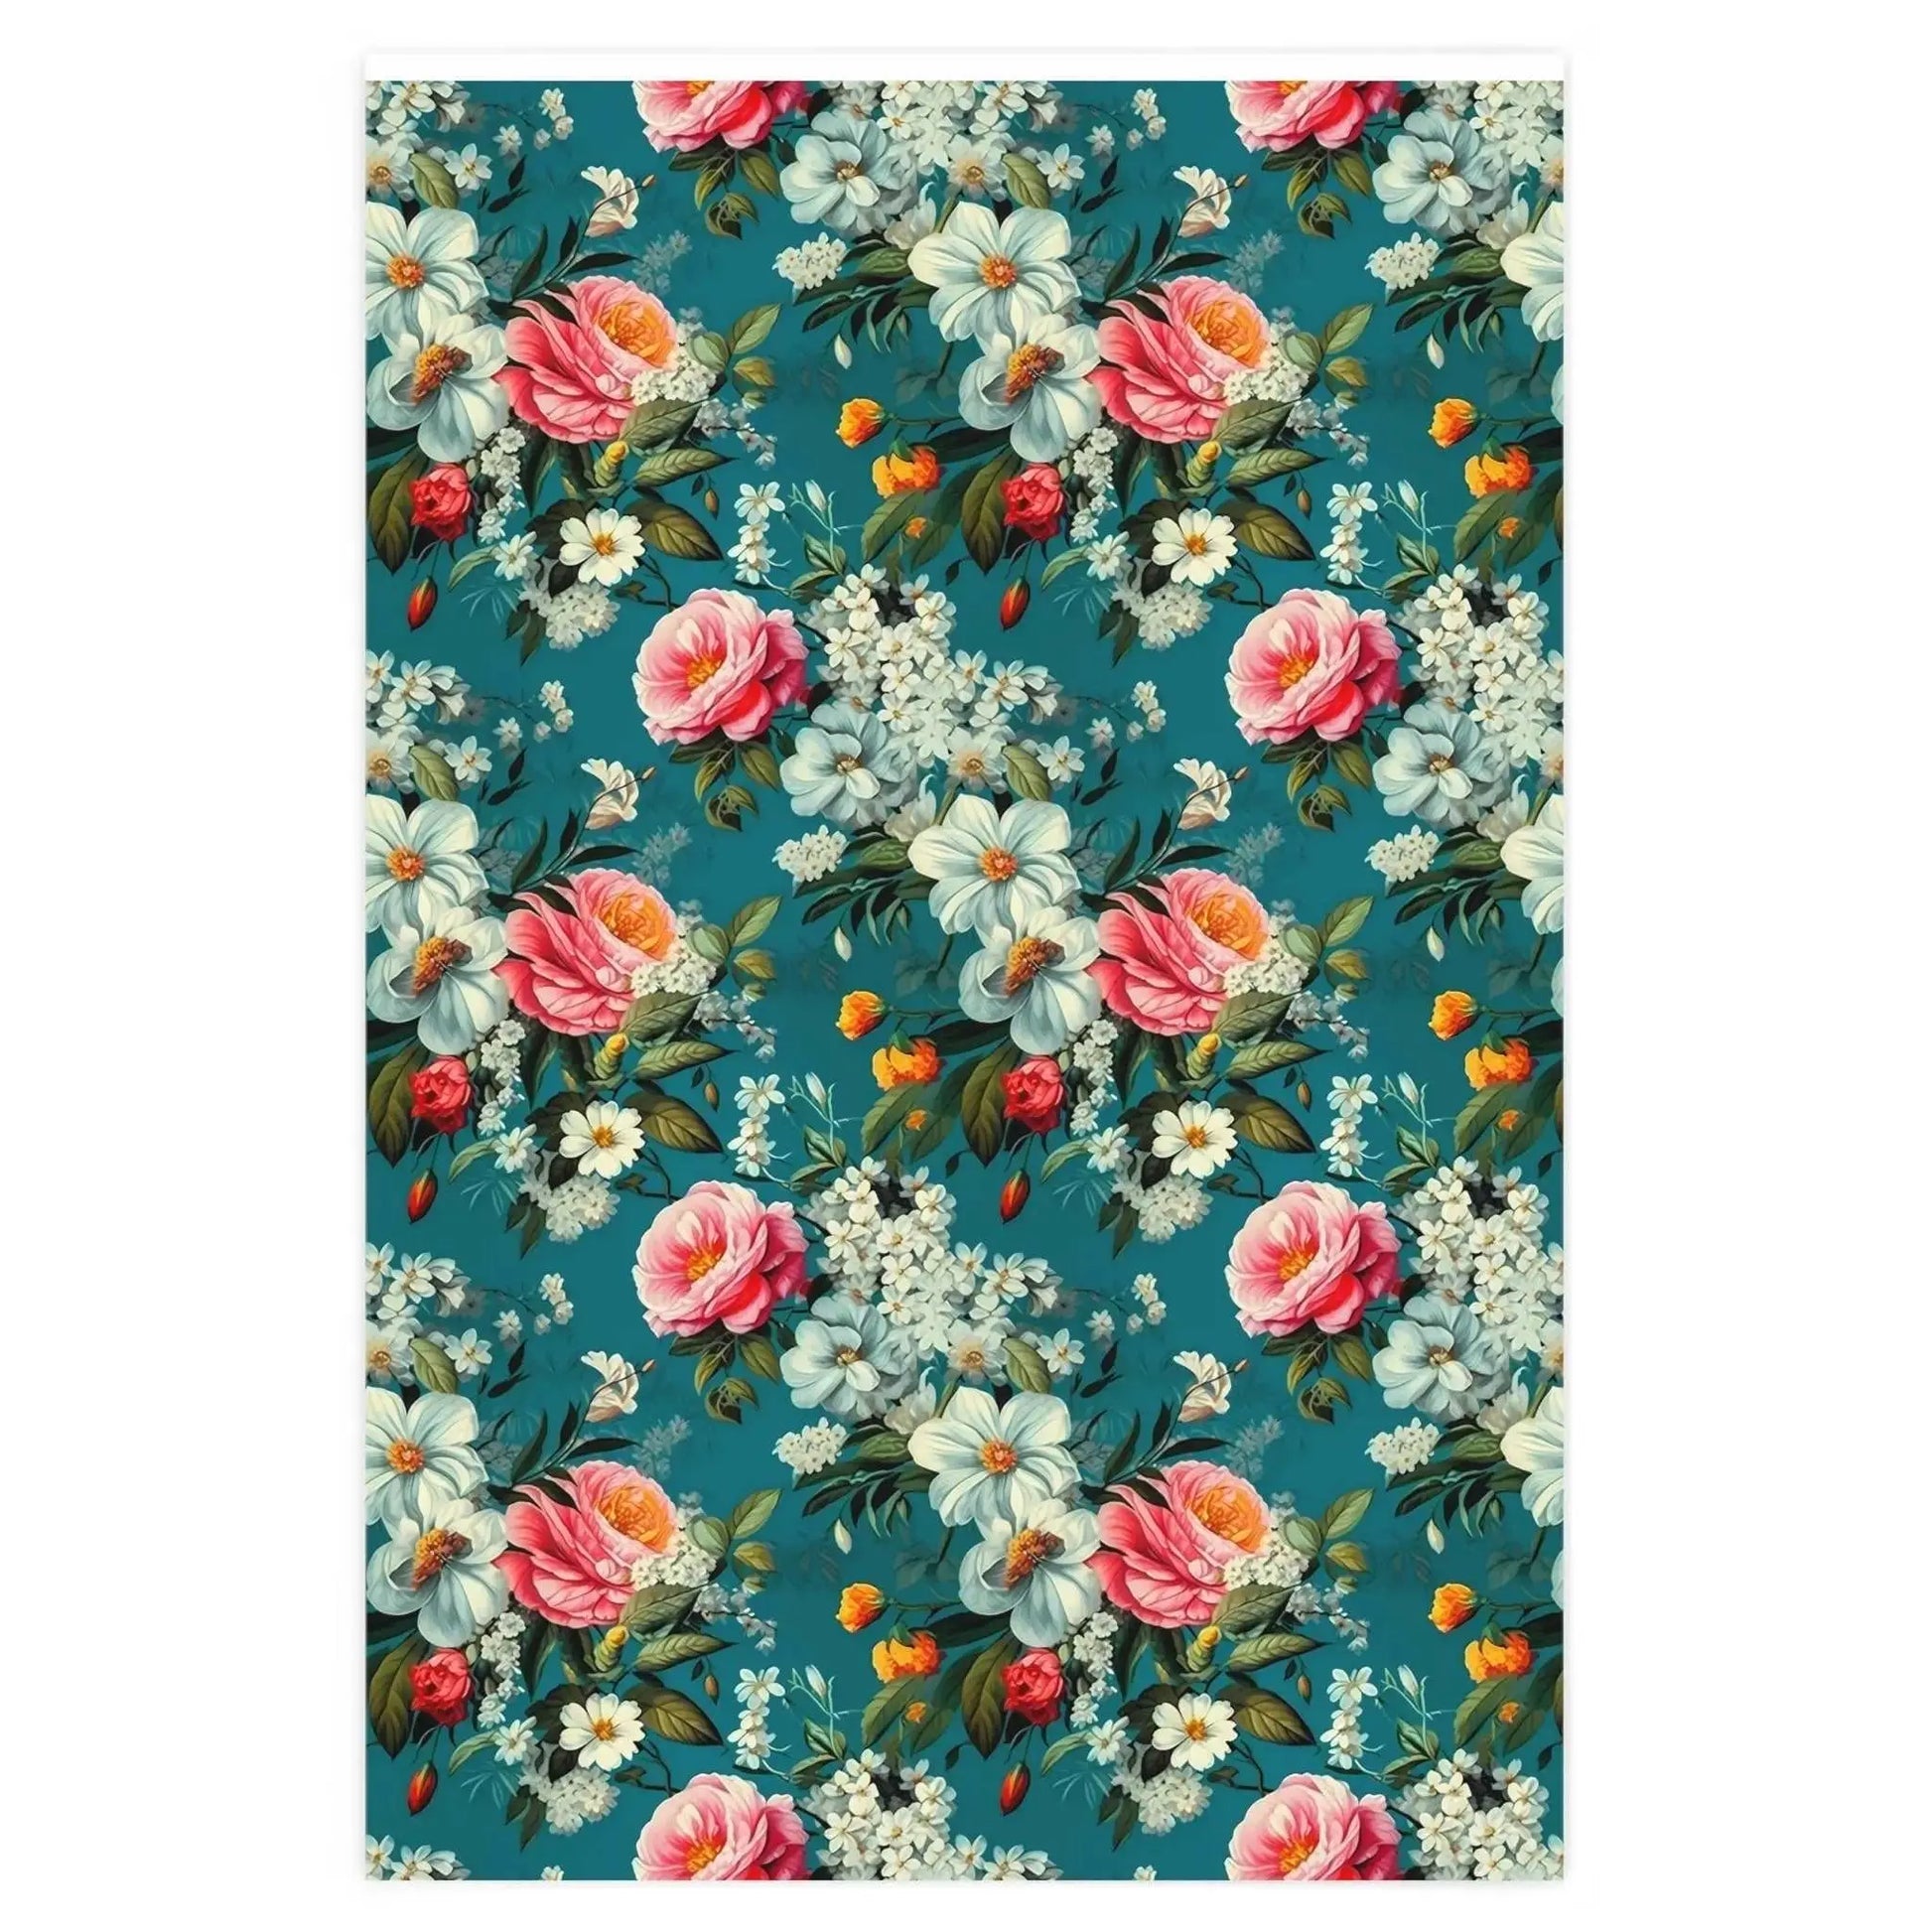 Southern Flowers Wrapping Paper Roll | Pretty Floral Gift Wrap | Colorful Flowers Teal Background - Premium Floral wrapping paper from The Curated Goose - From $23.98! Shop now at TheCuratedGoose.com